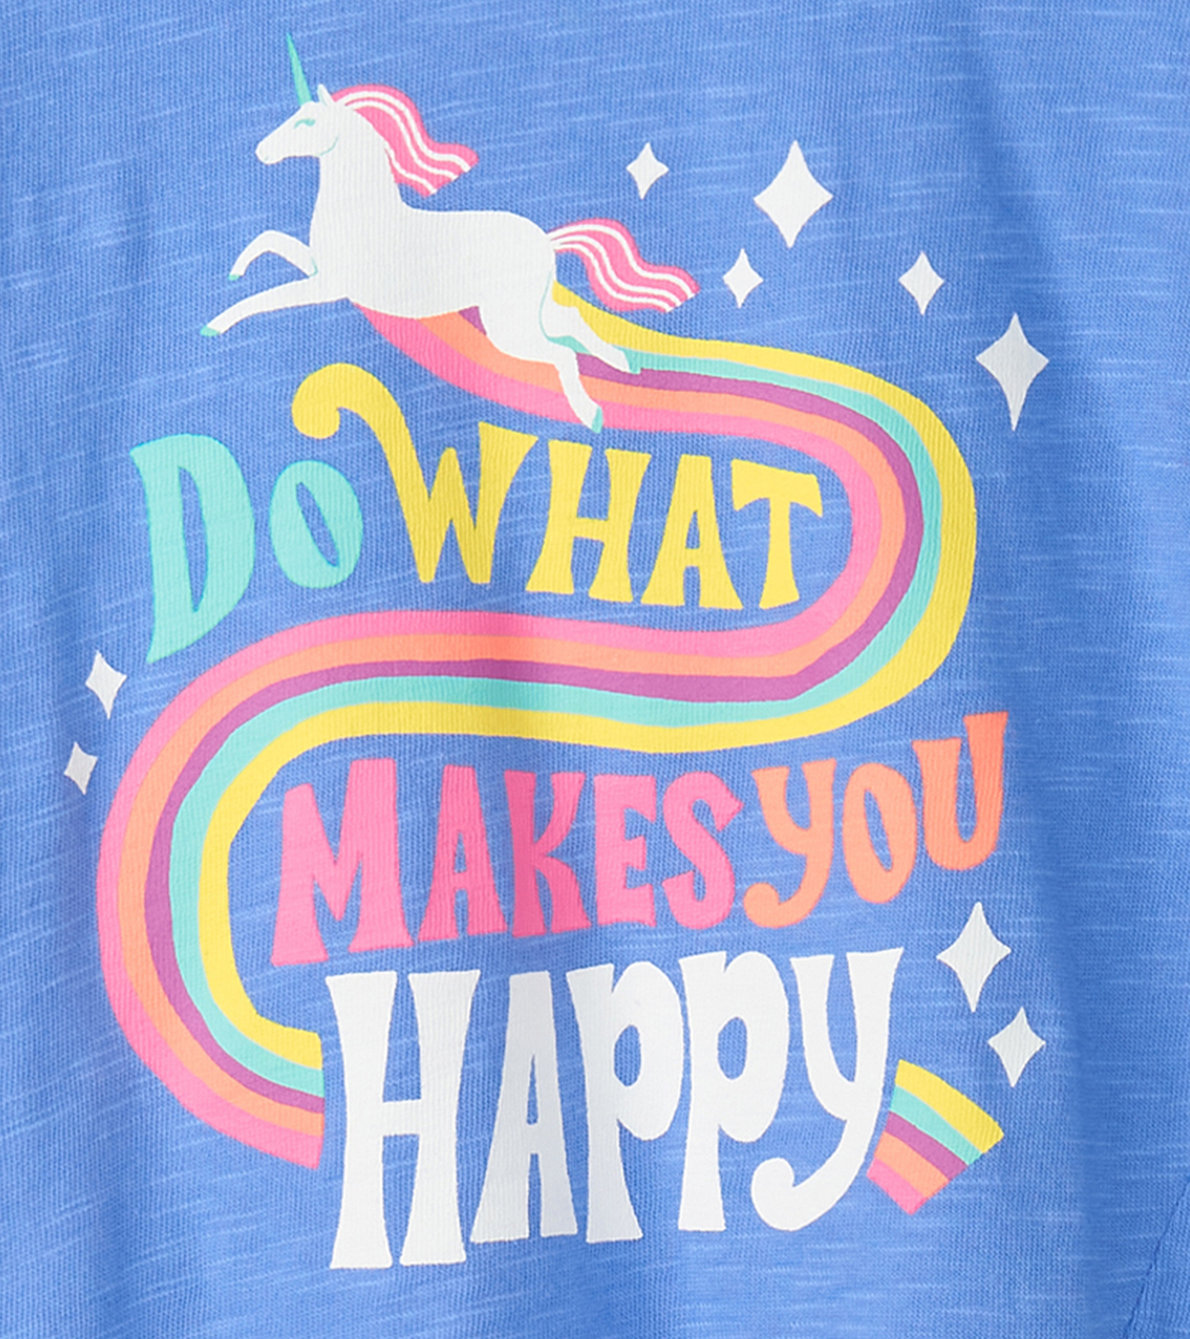 View larger image of Girls Do What Makes You Happy Tie Front T-Shirt